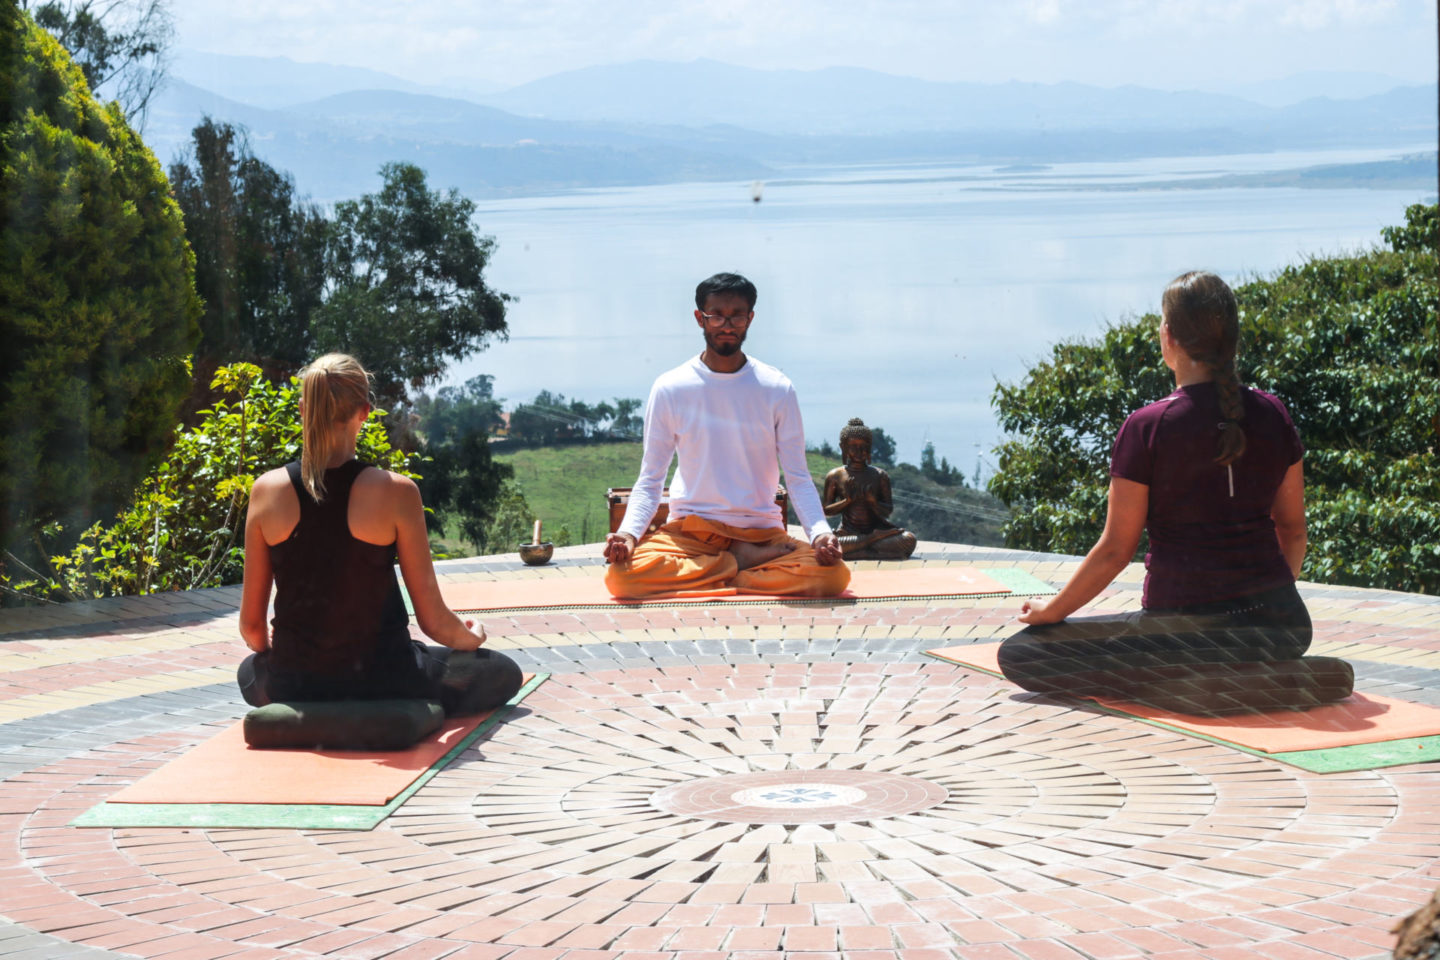 Yoga Retreat Colombia | The Best Places to Find Your Zen